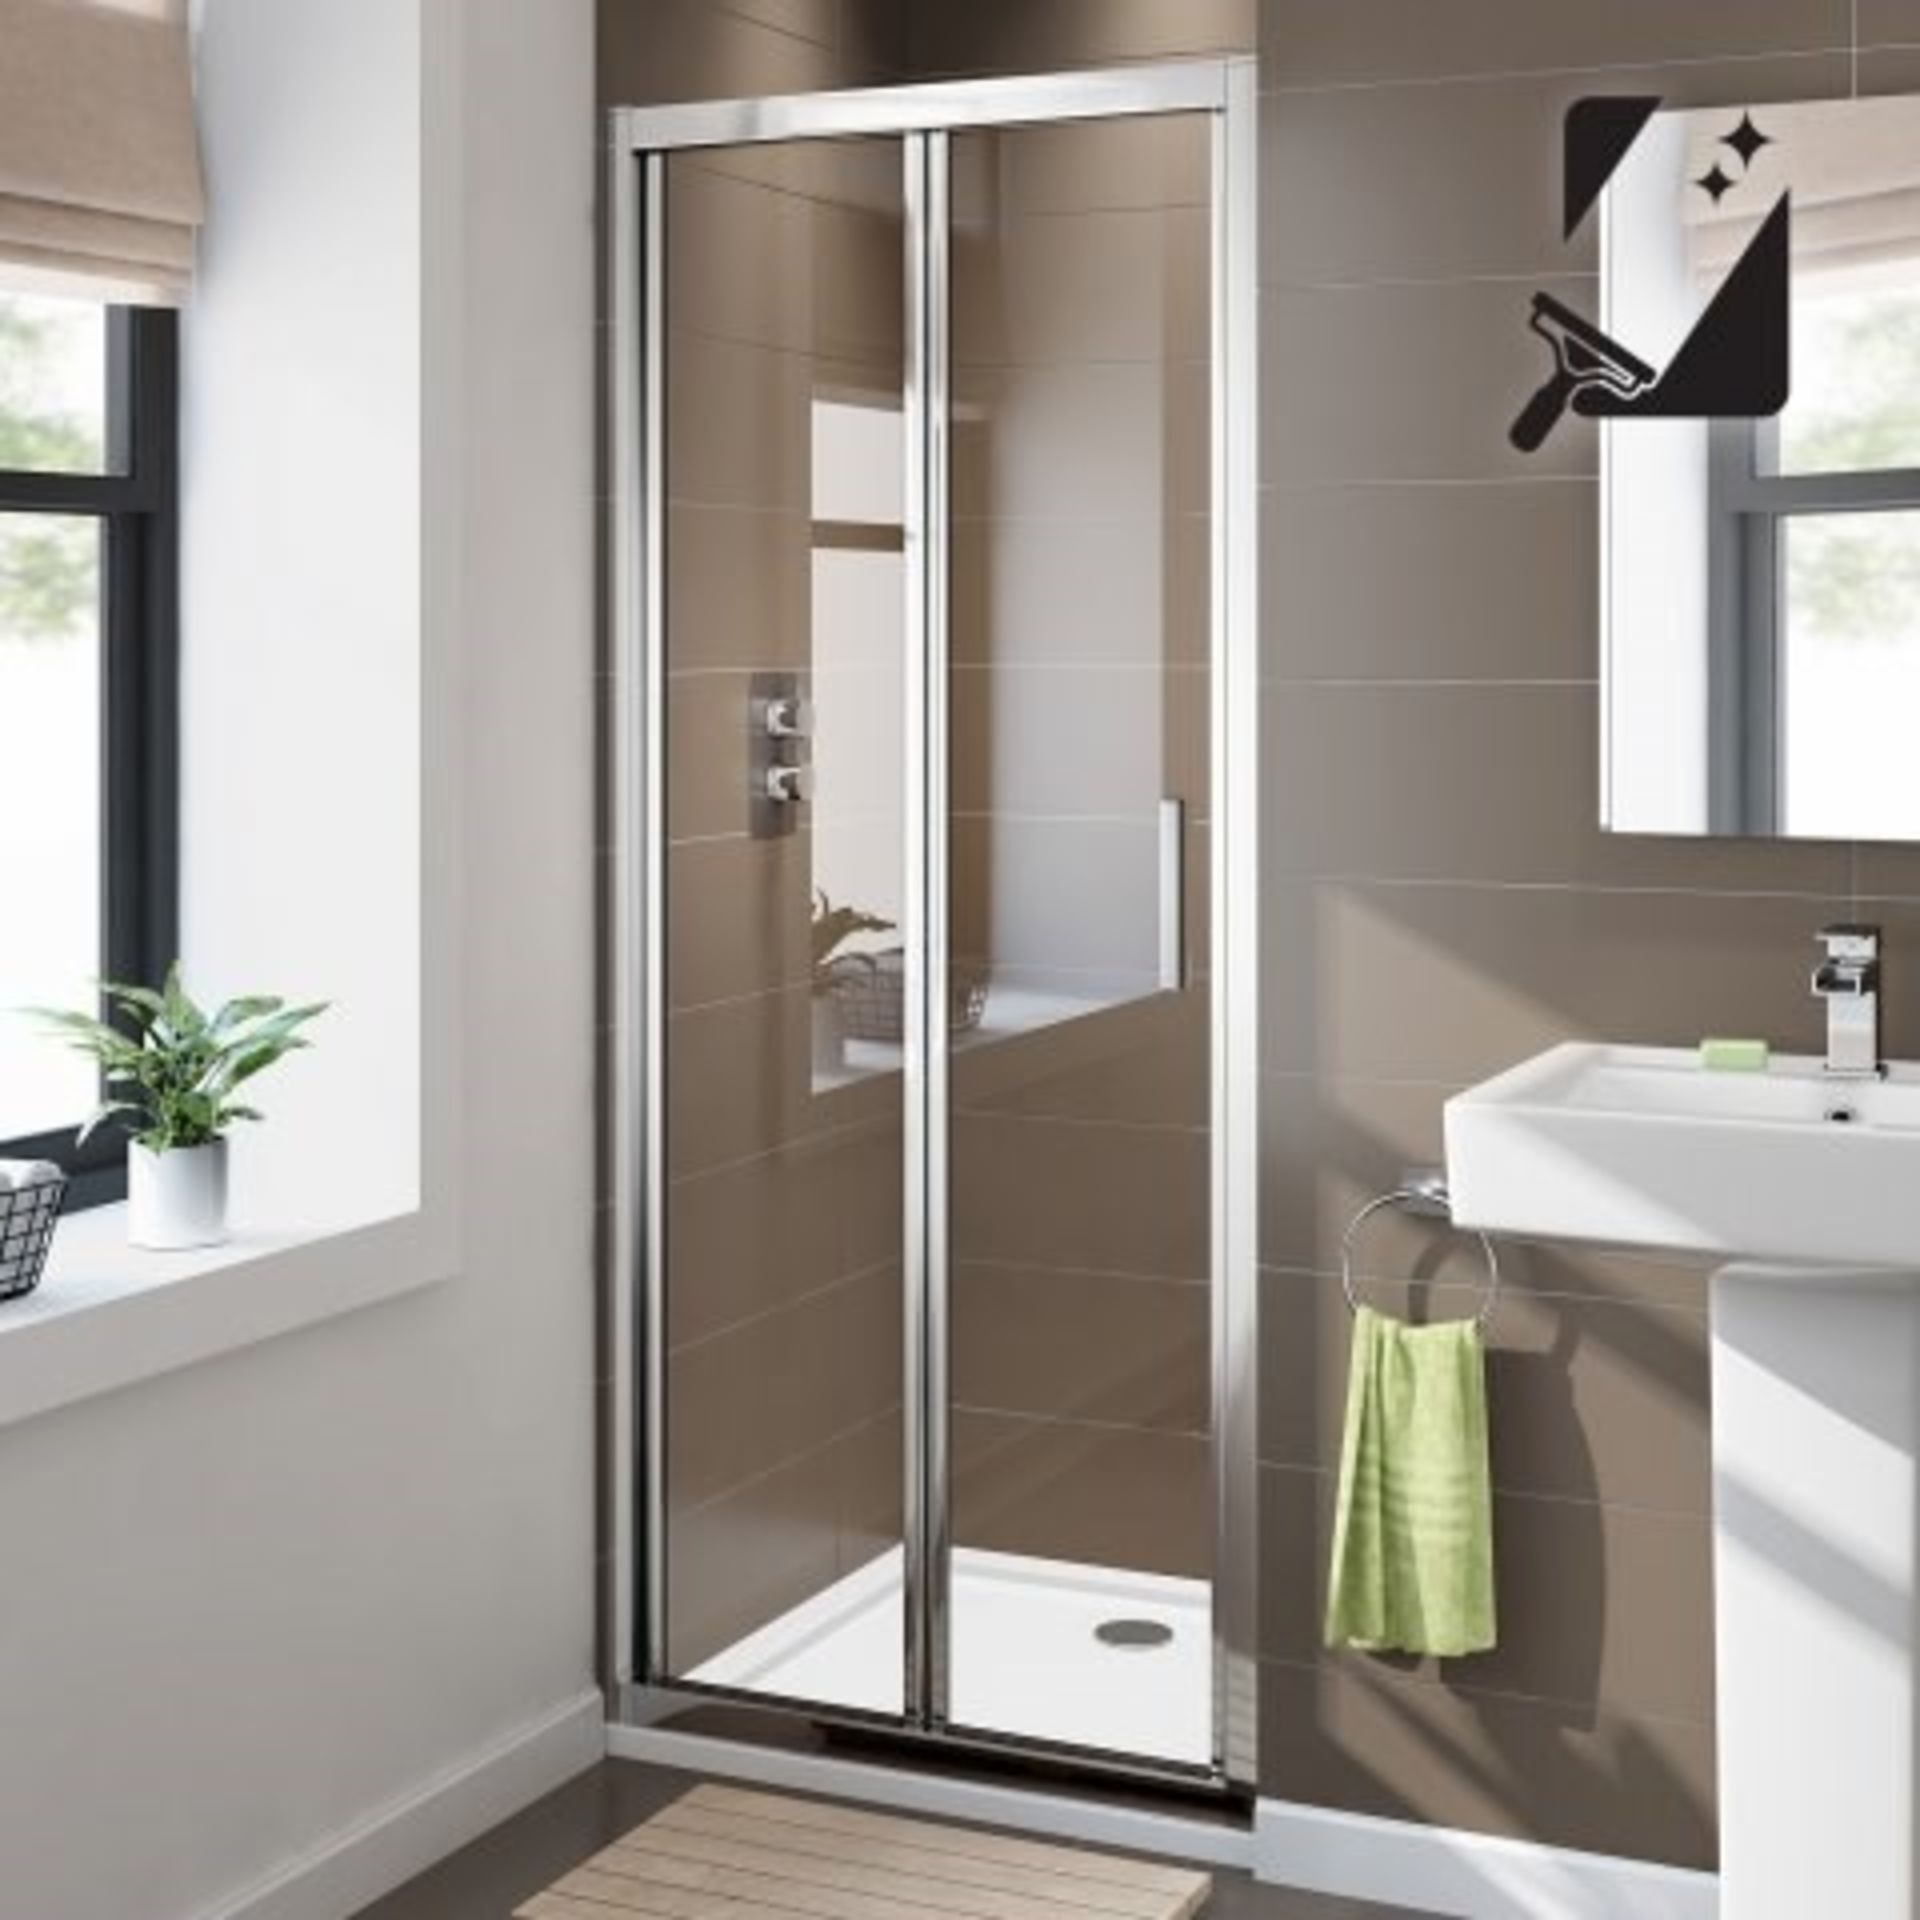 NEW 900mm - 8mm - Premium EasyClean Bifold Shower Door. RRP £379.99.Durability to withstand e...